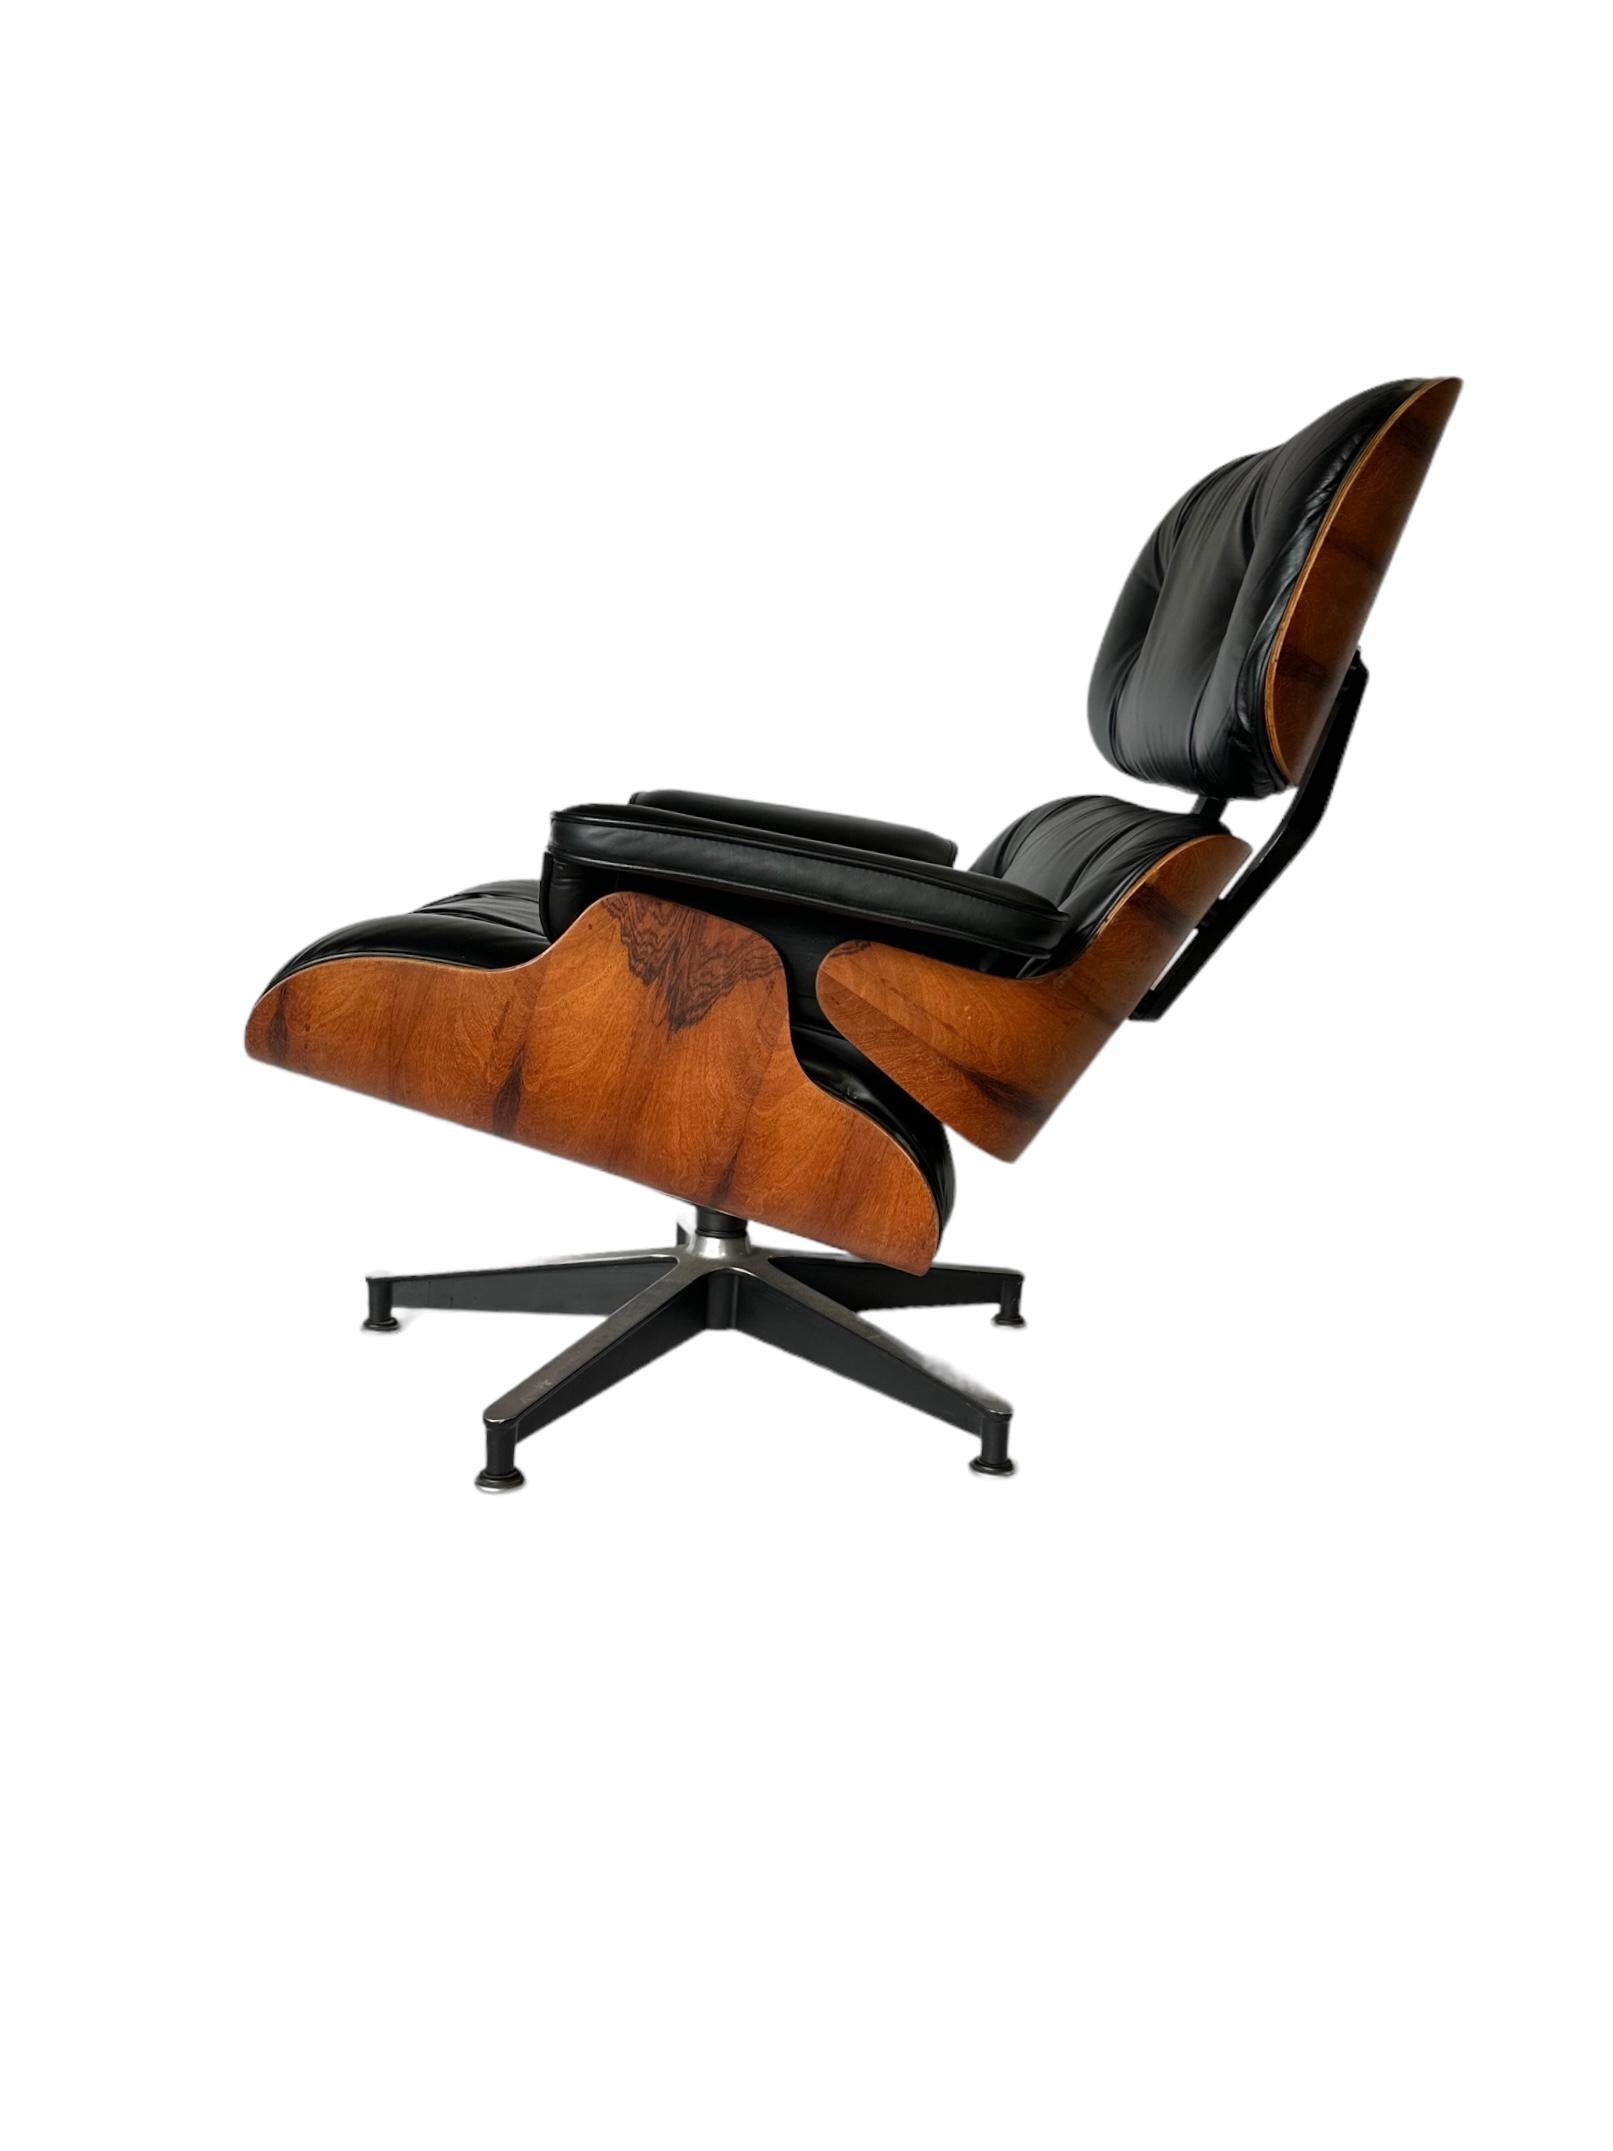 Restored Herman Miller Eames Lounge and Ottoman 4